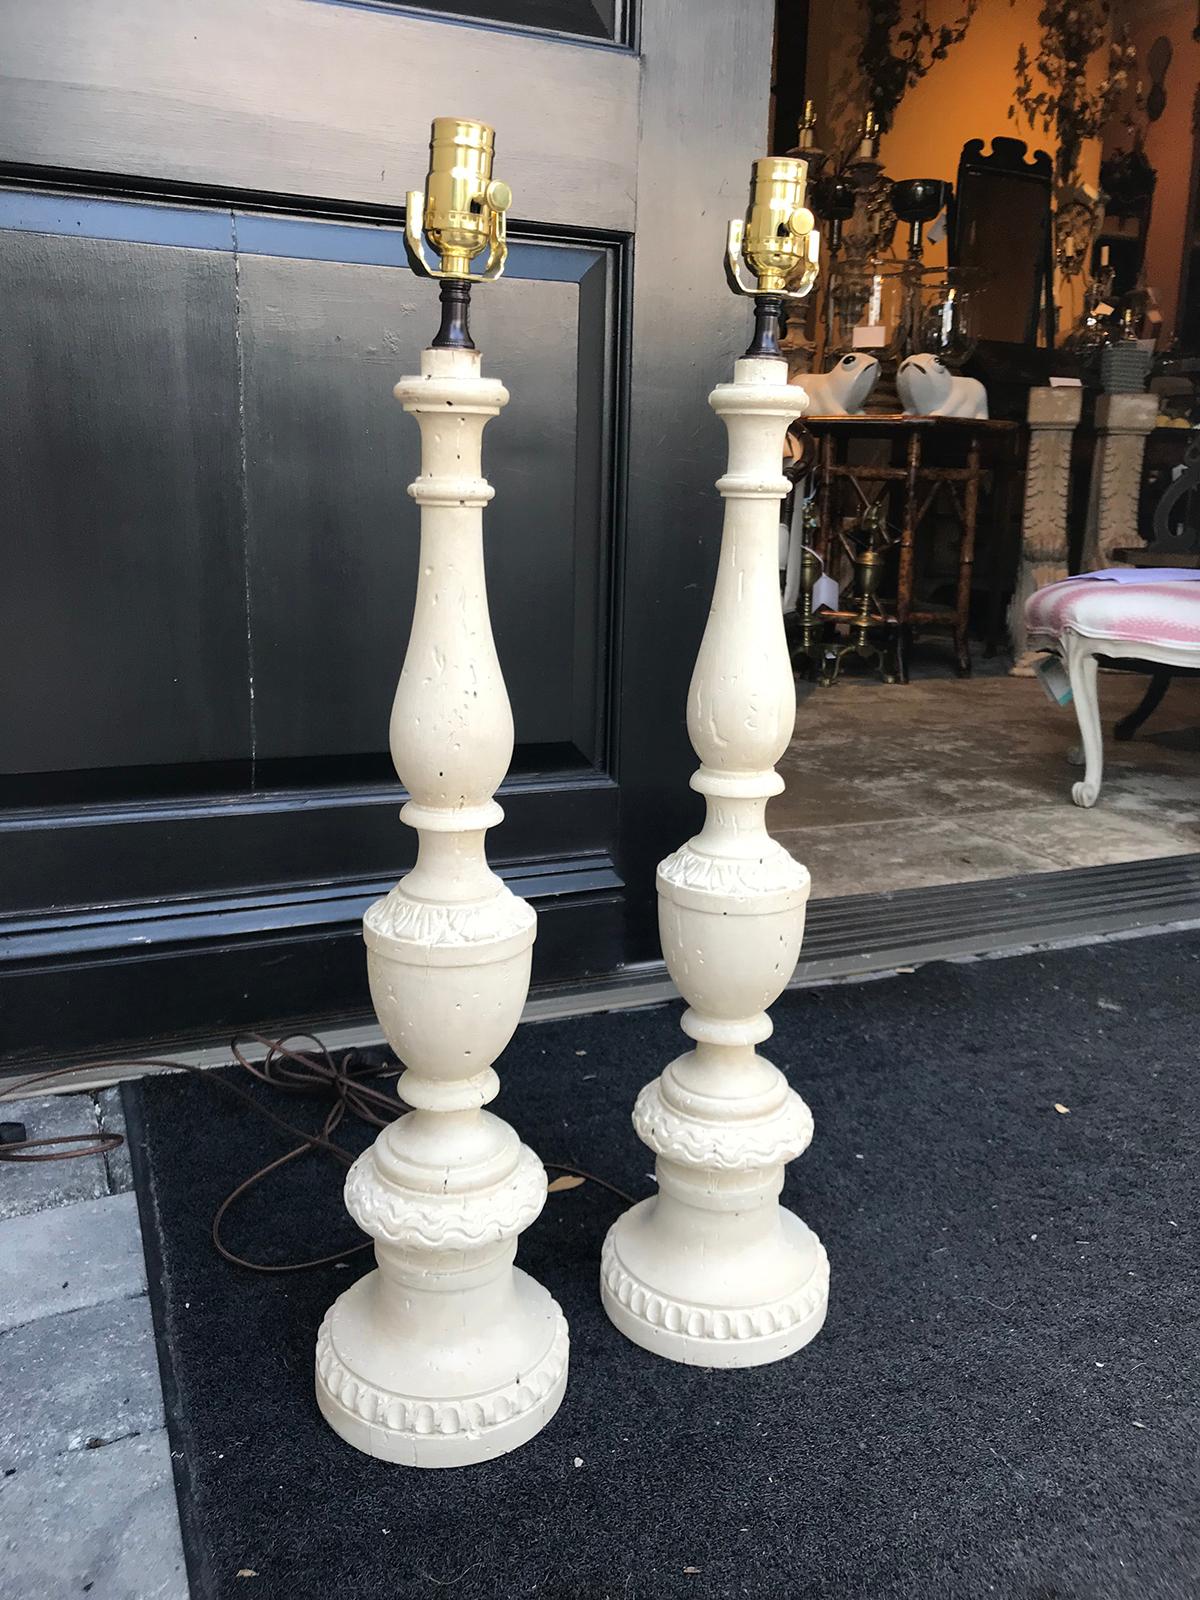 Wood Pair of 18th-19th Century Italian Prickets as Lamps, White Finish